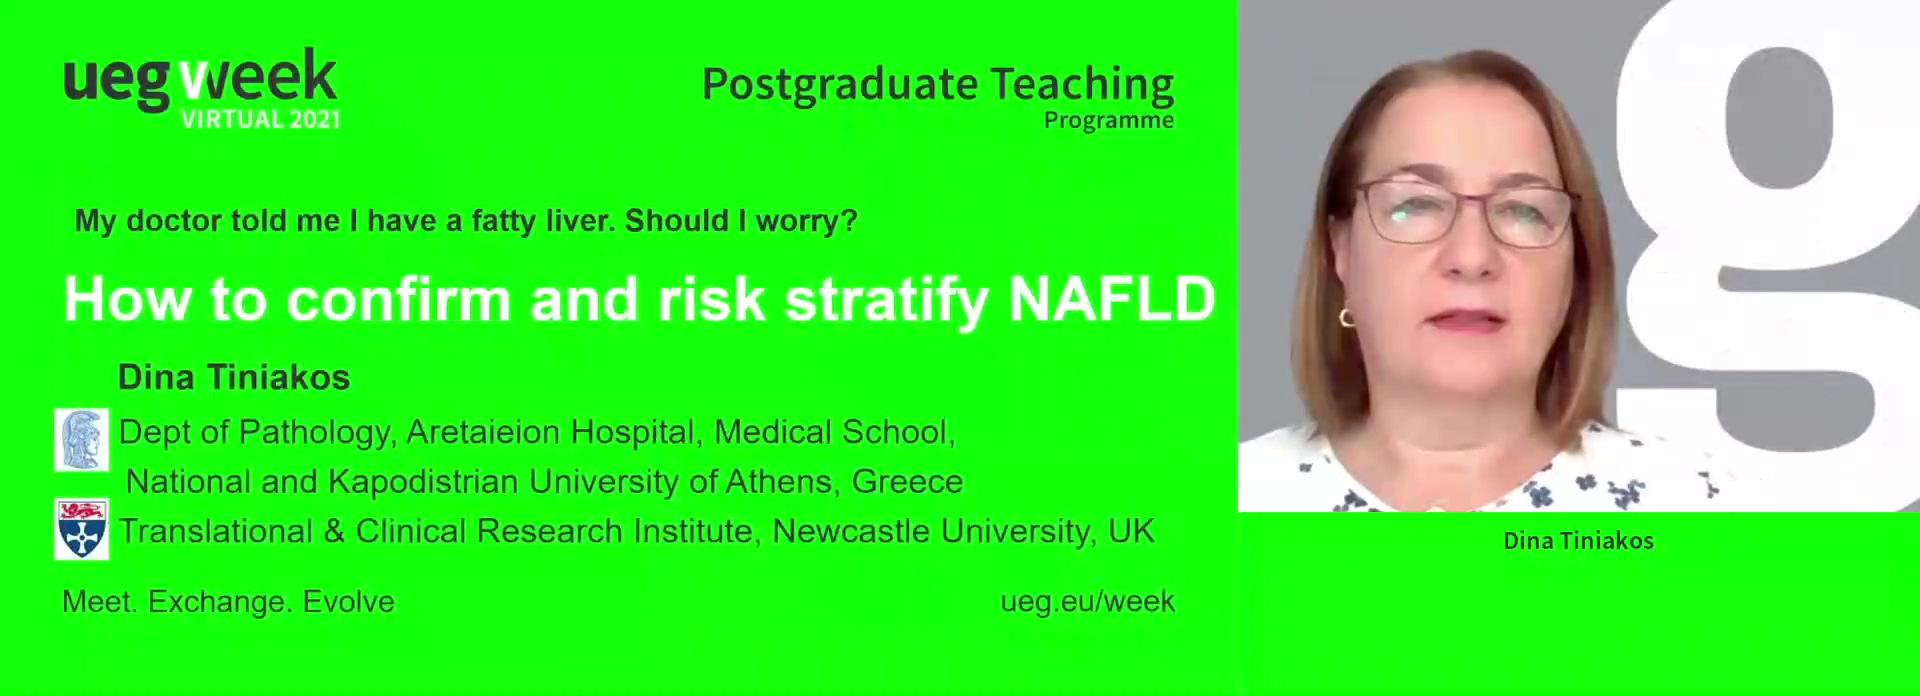 How to confirm and risk stratify NAFLD?